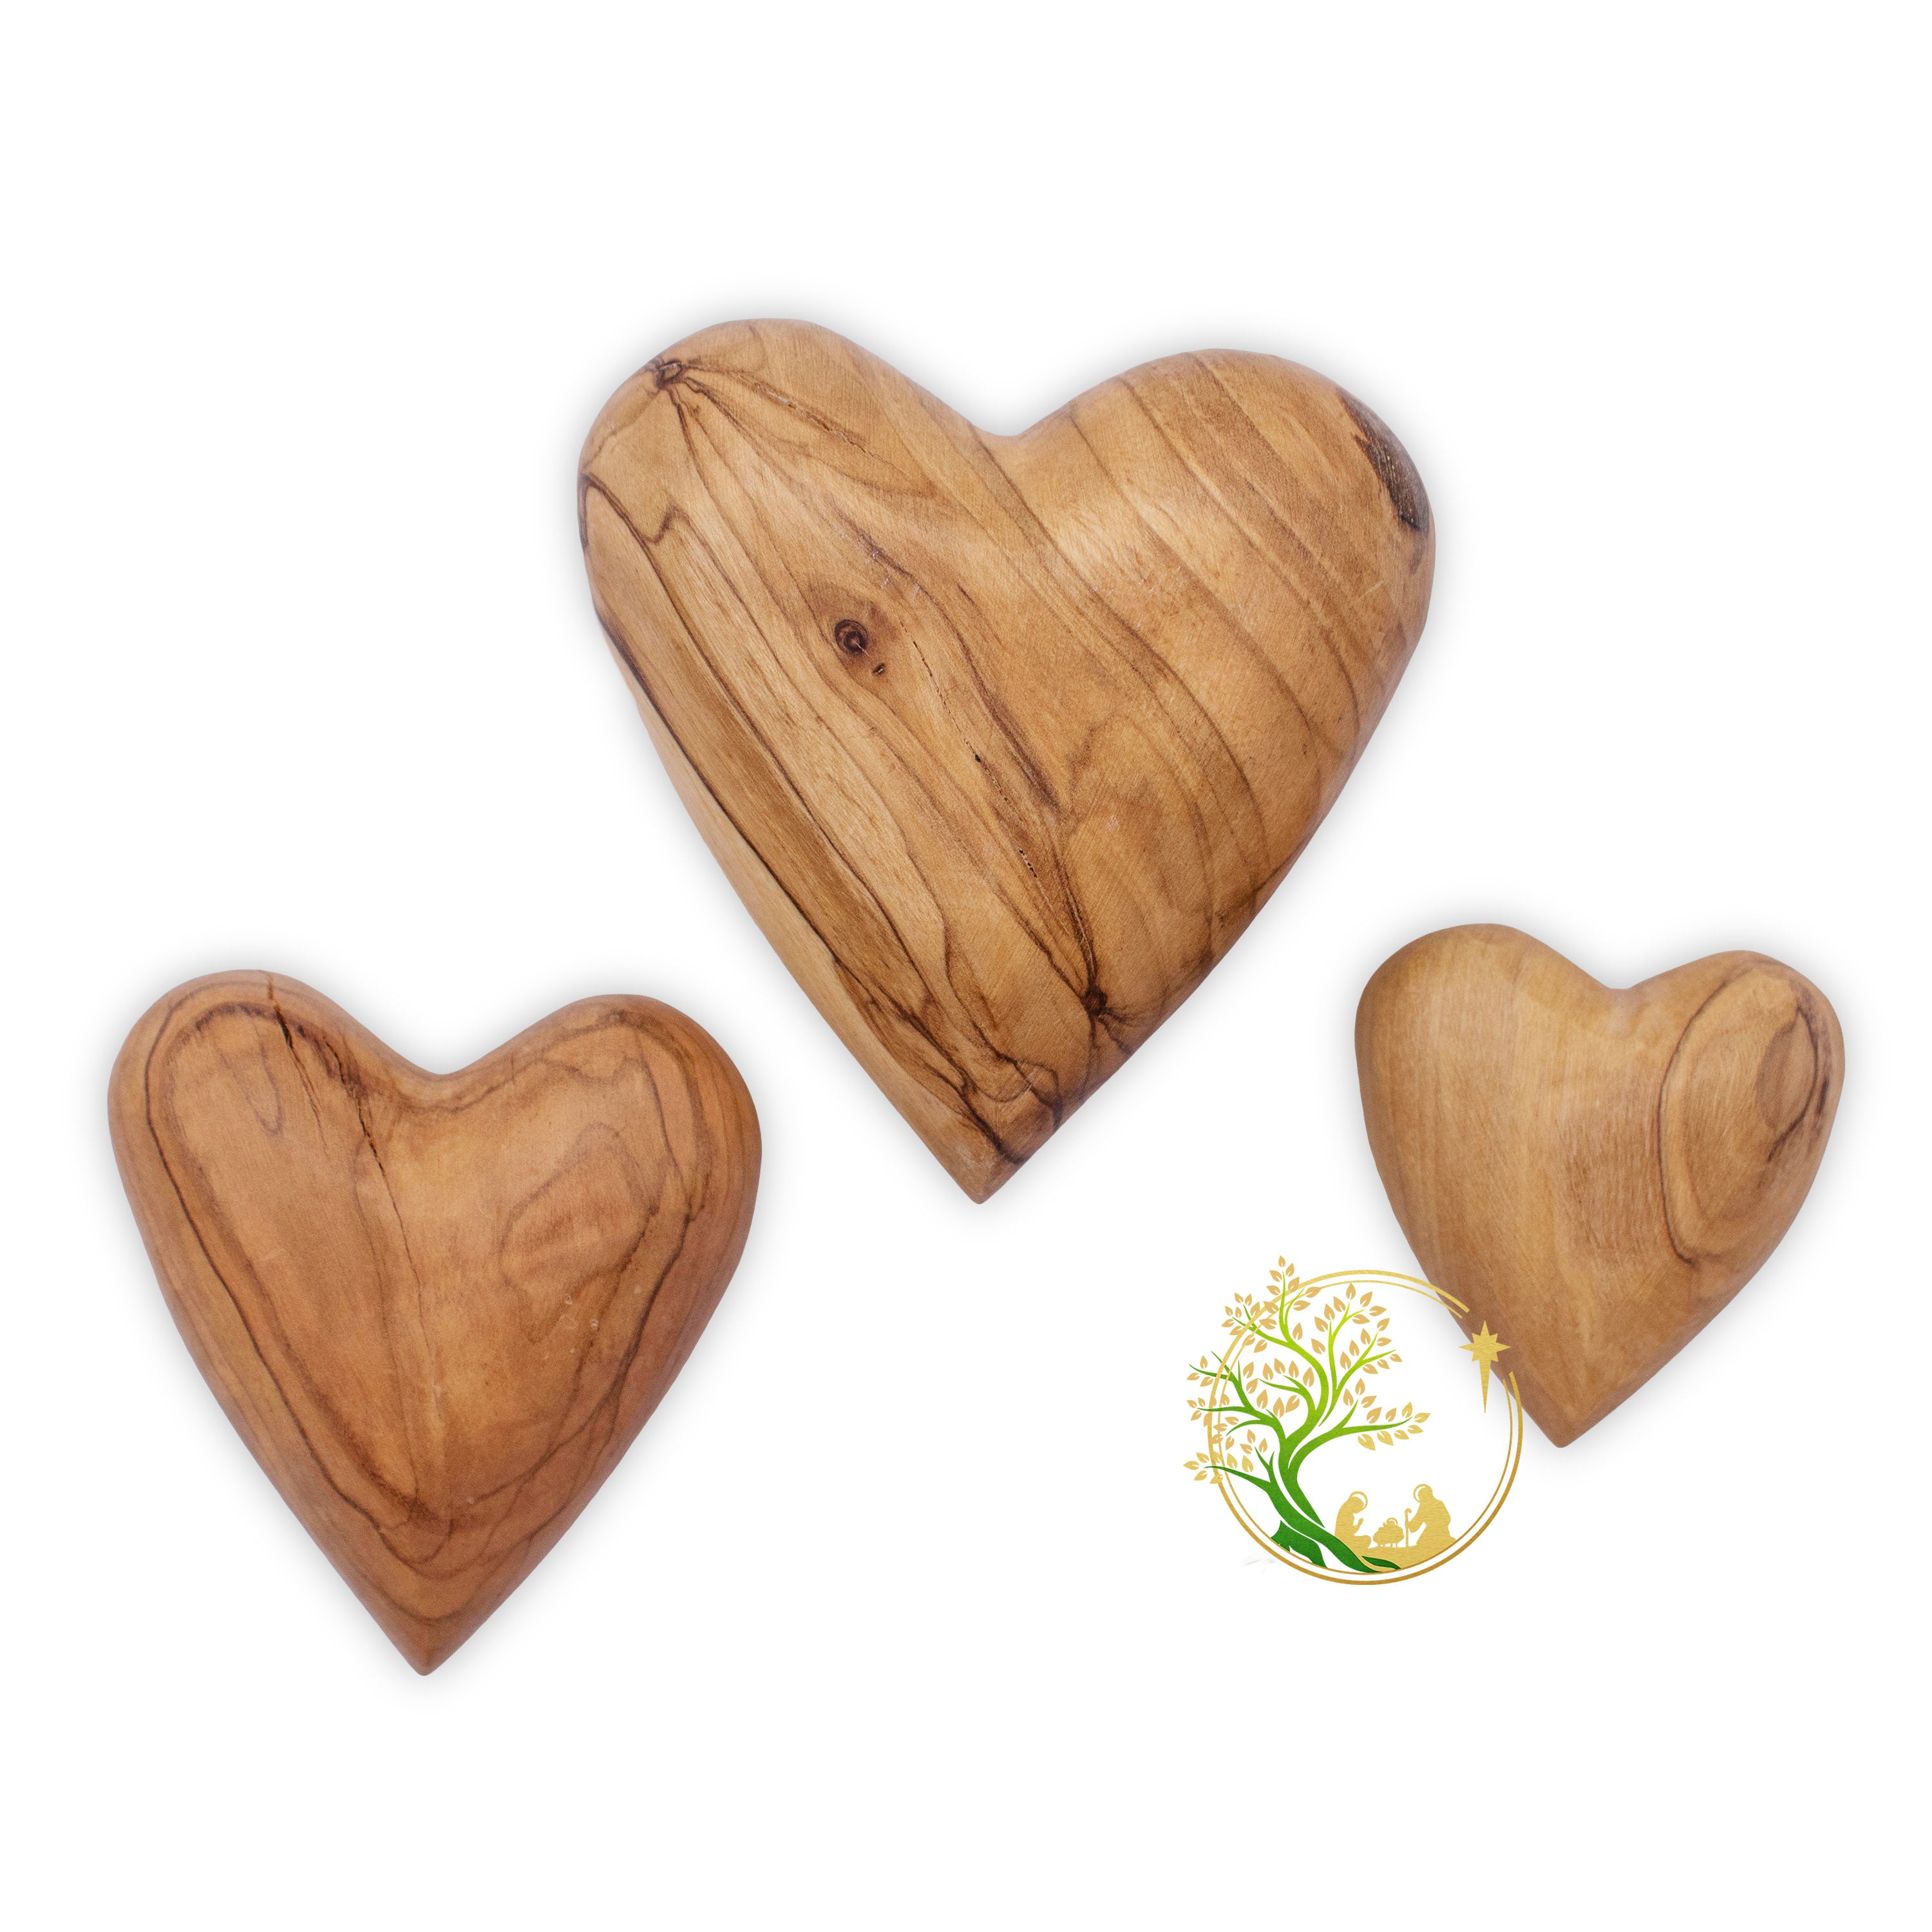 Heart Shape Wood Photos and Images